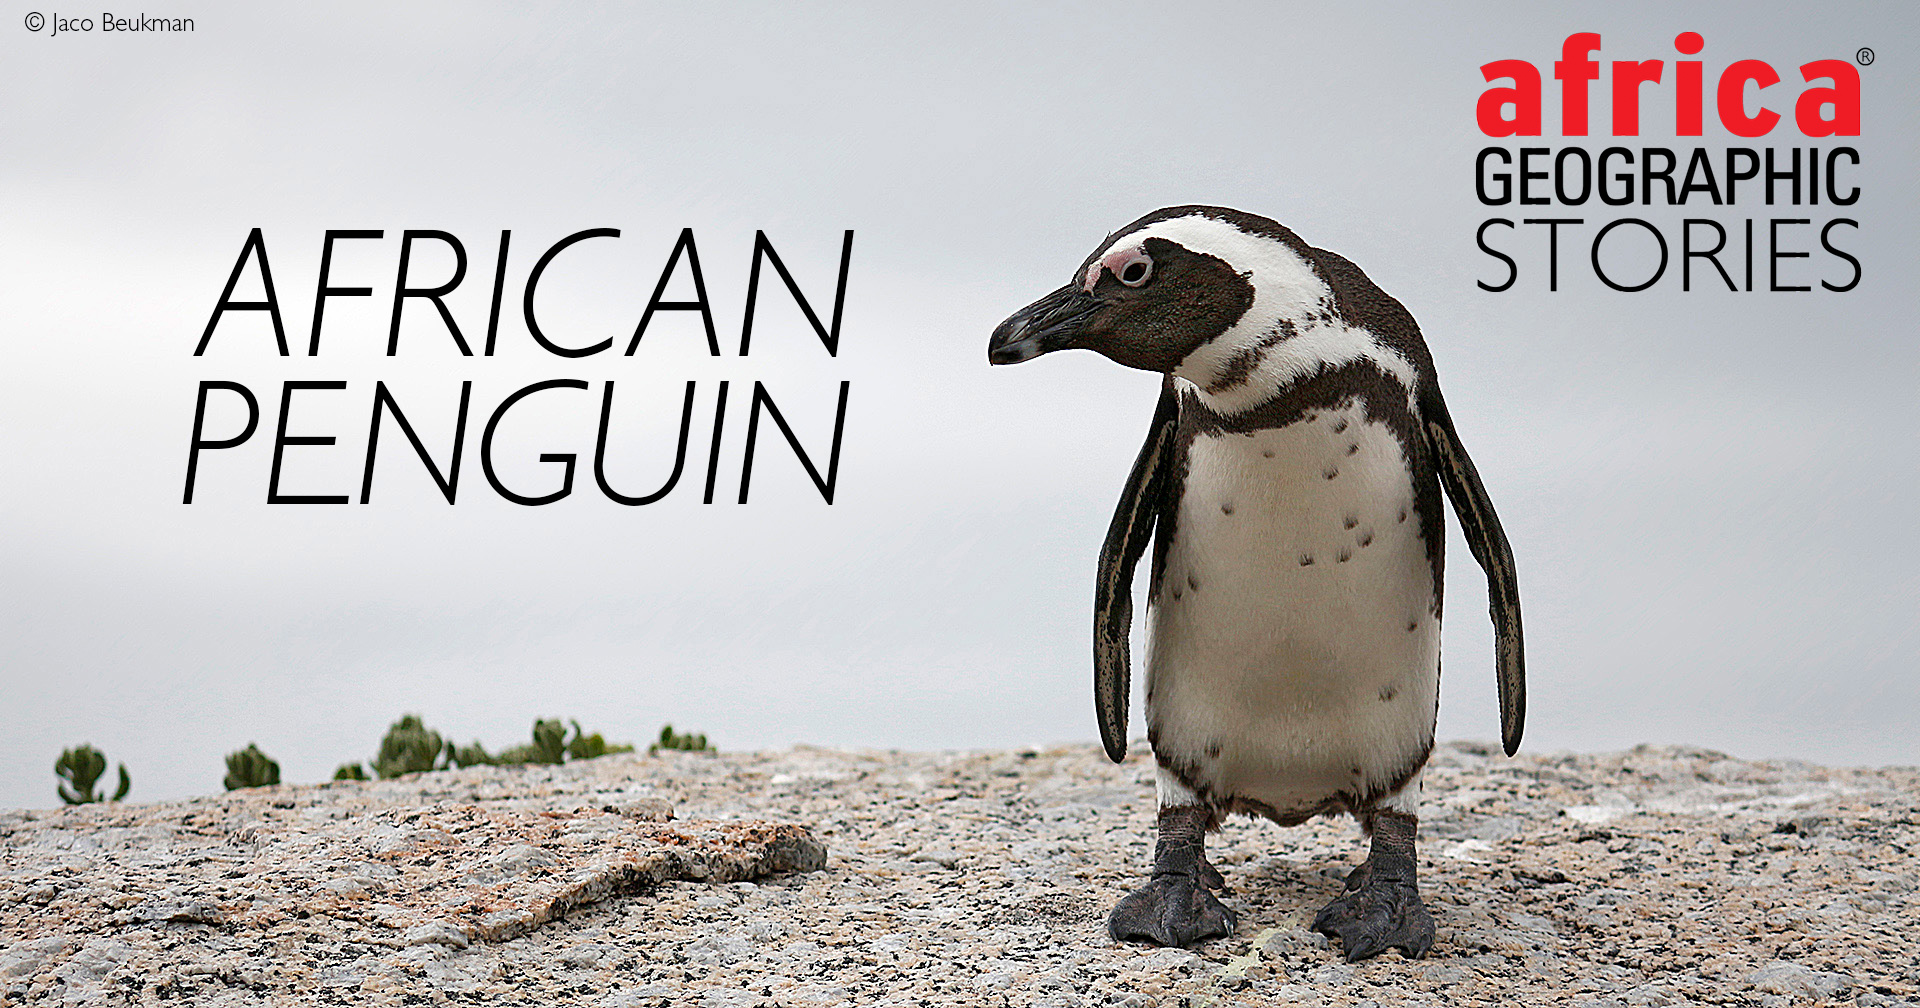 African penguin - Africa Geographic